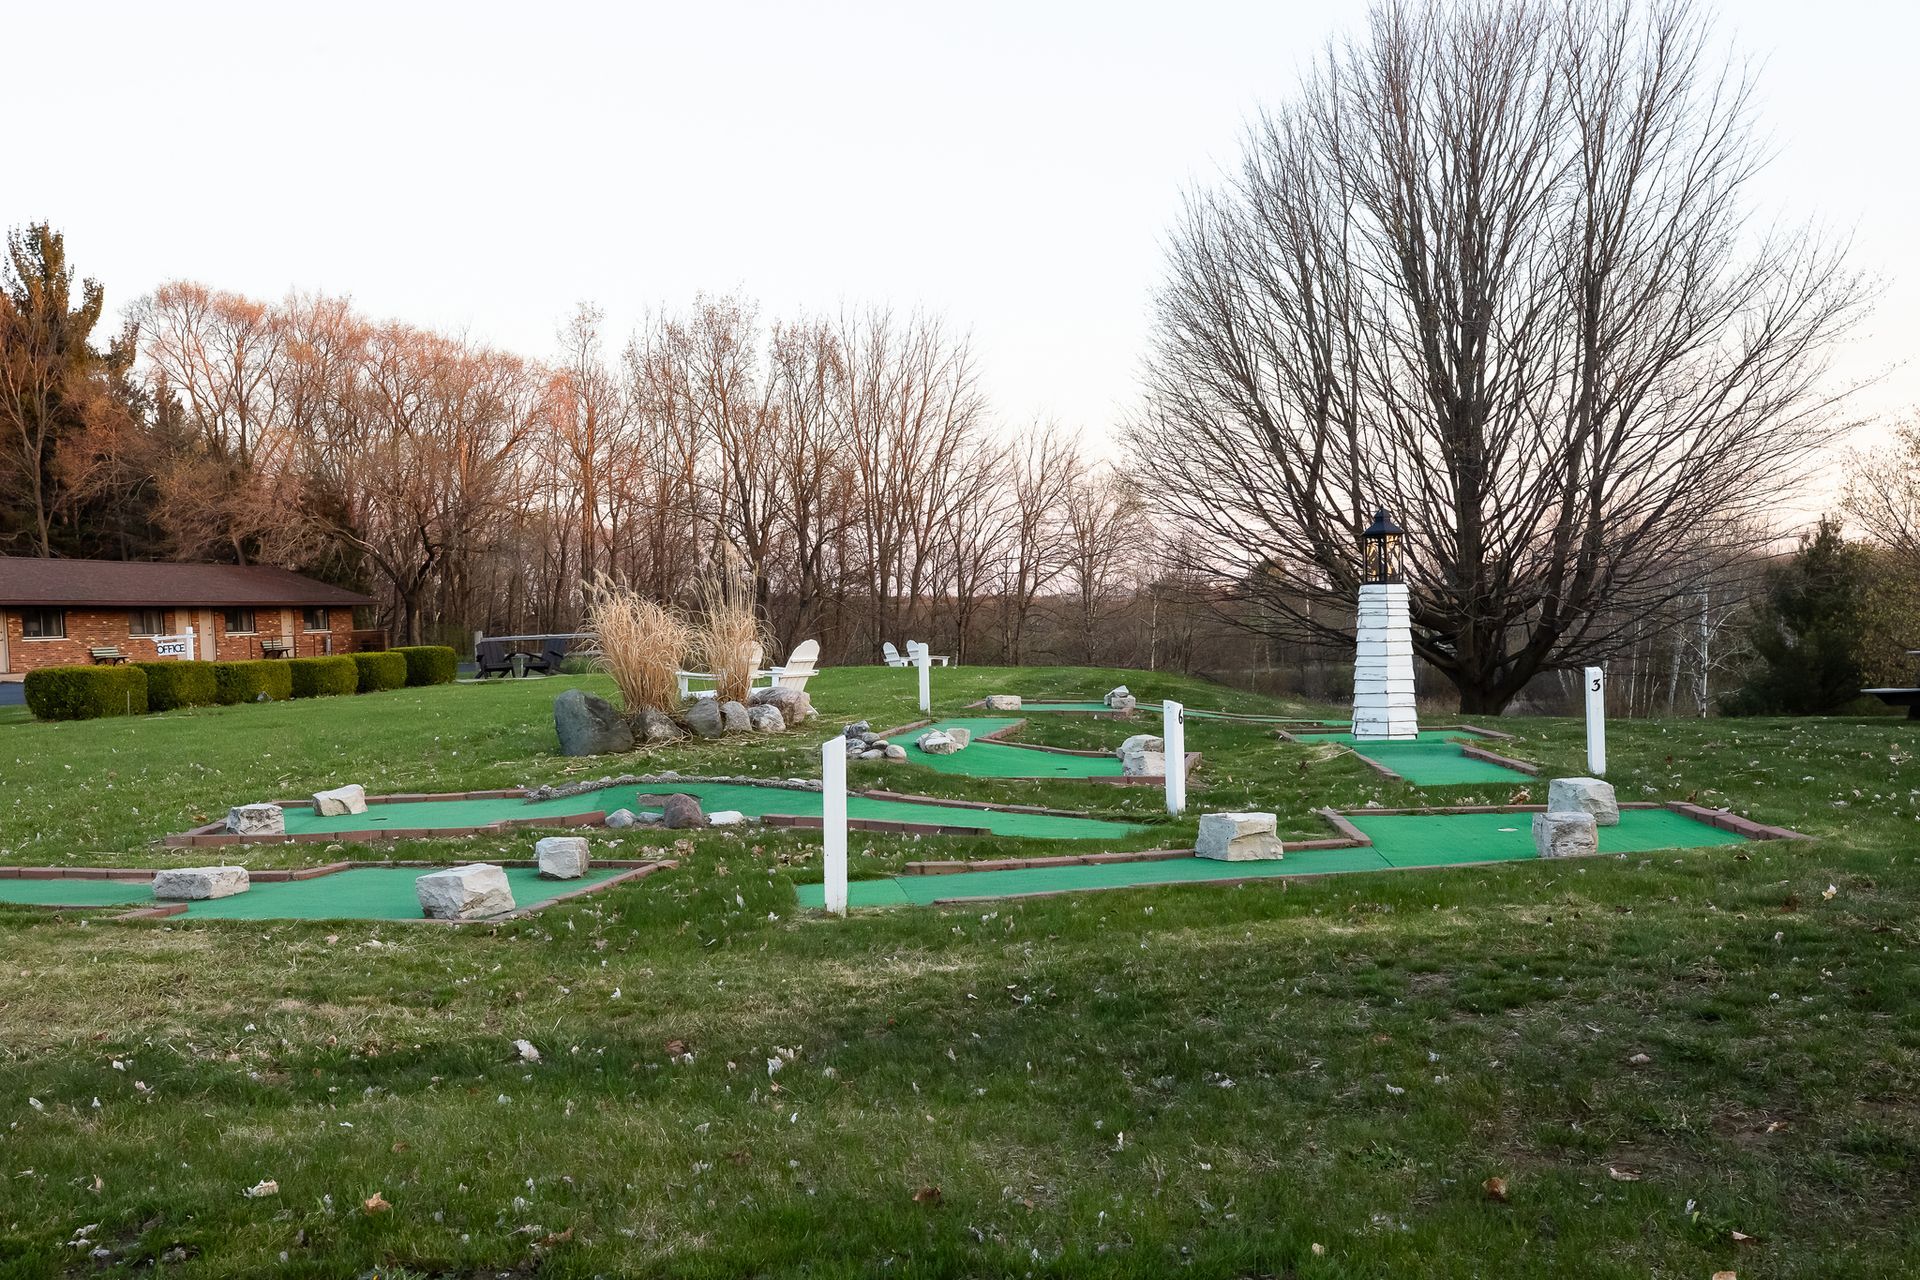 A mini golf course in a grassy field with trees in the background